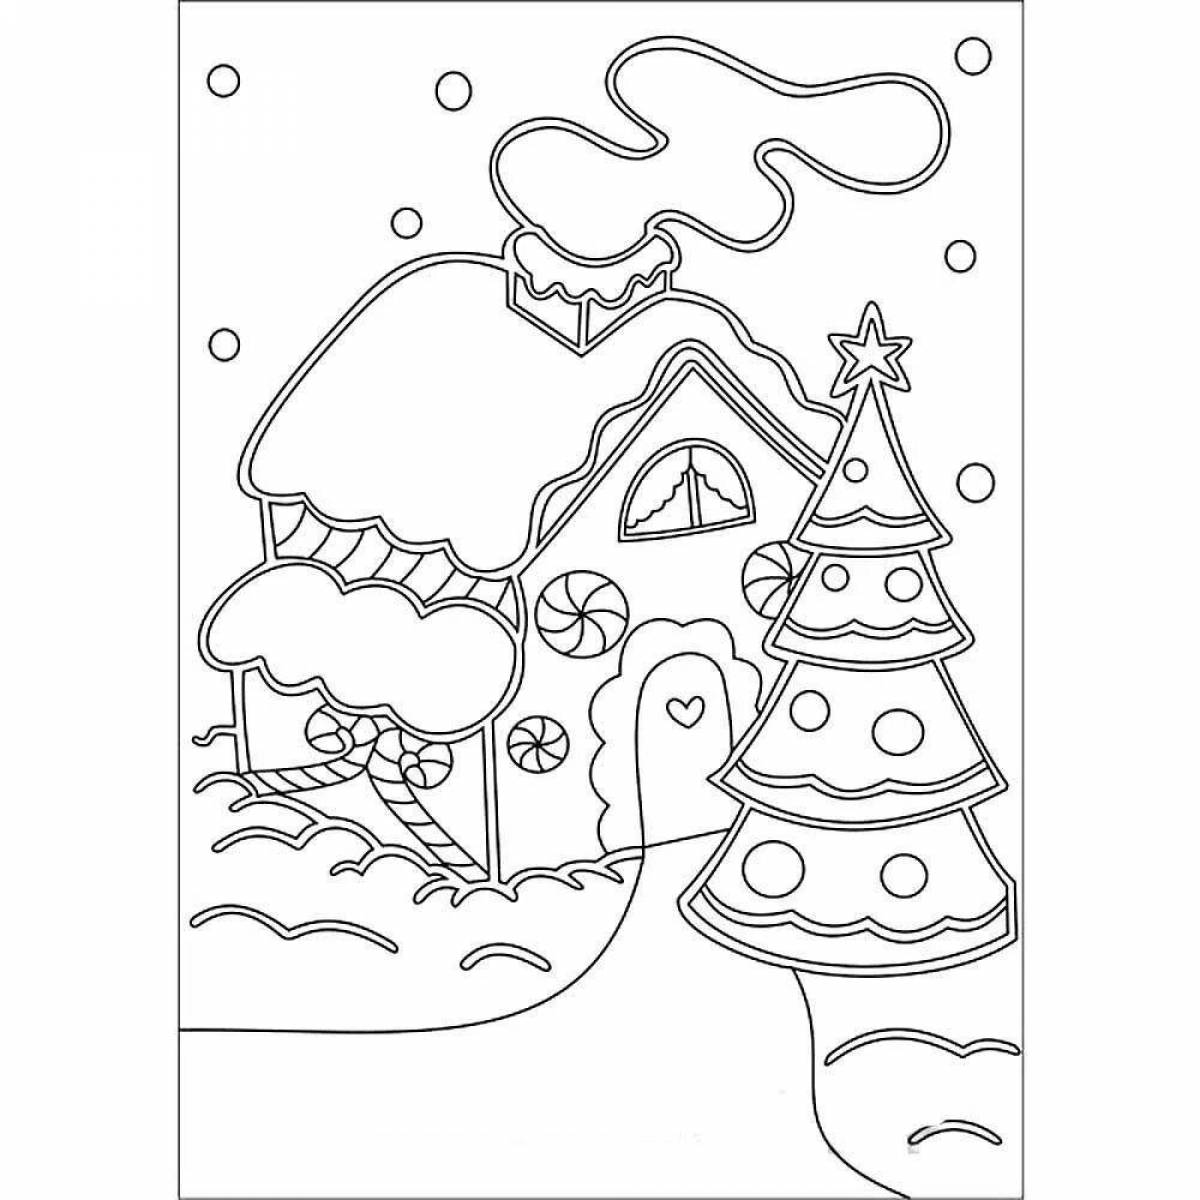 Great Christmas gingerbread house coloring book